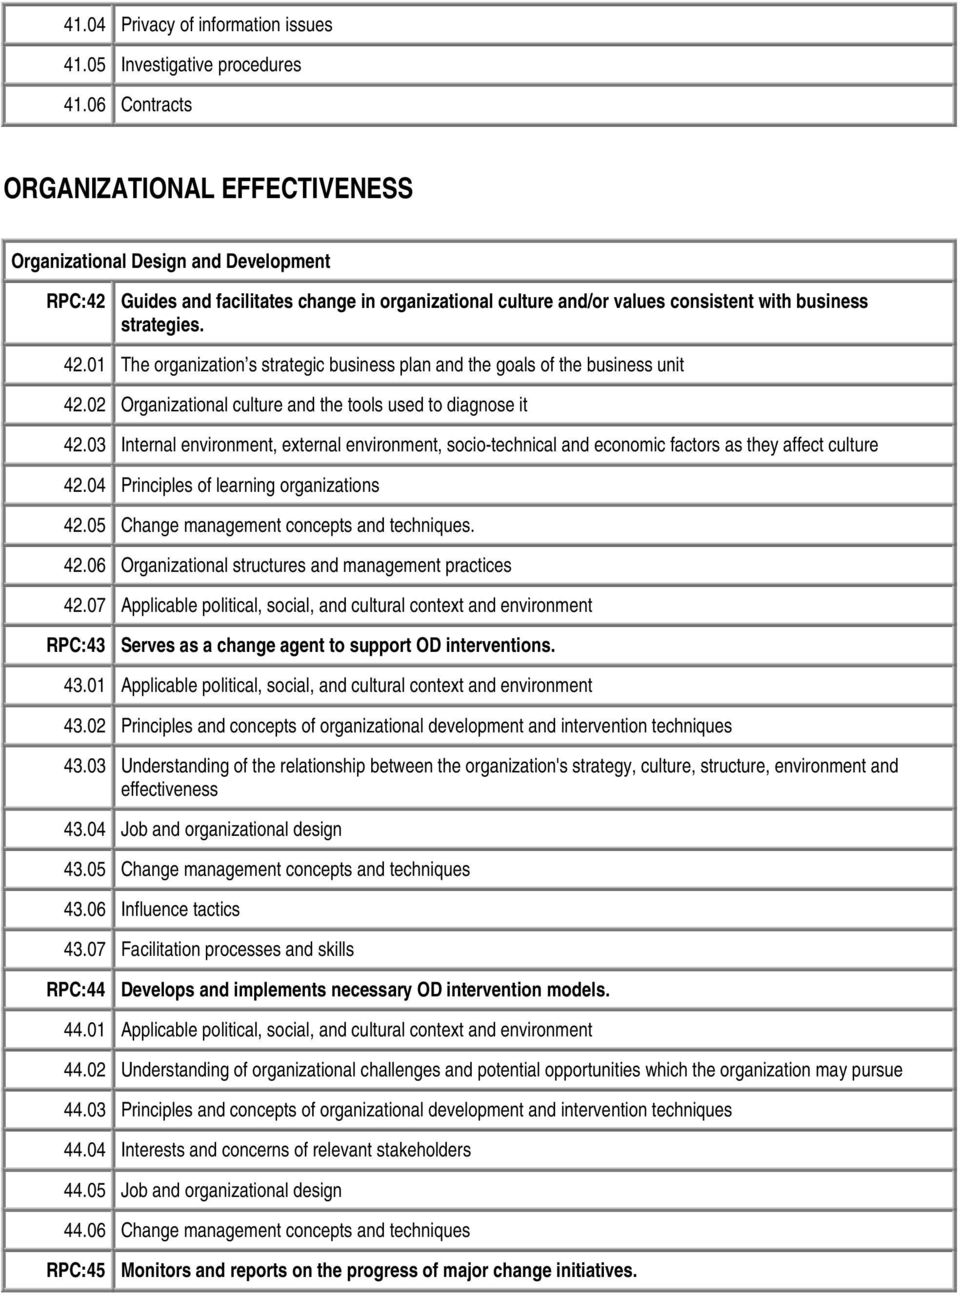 01 The organization s strategic business plan and the goals of the business unit 42.02 Organizational culture and the tools used to diagnose it 42.